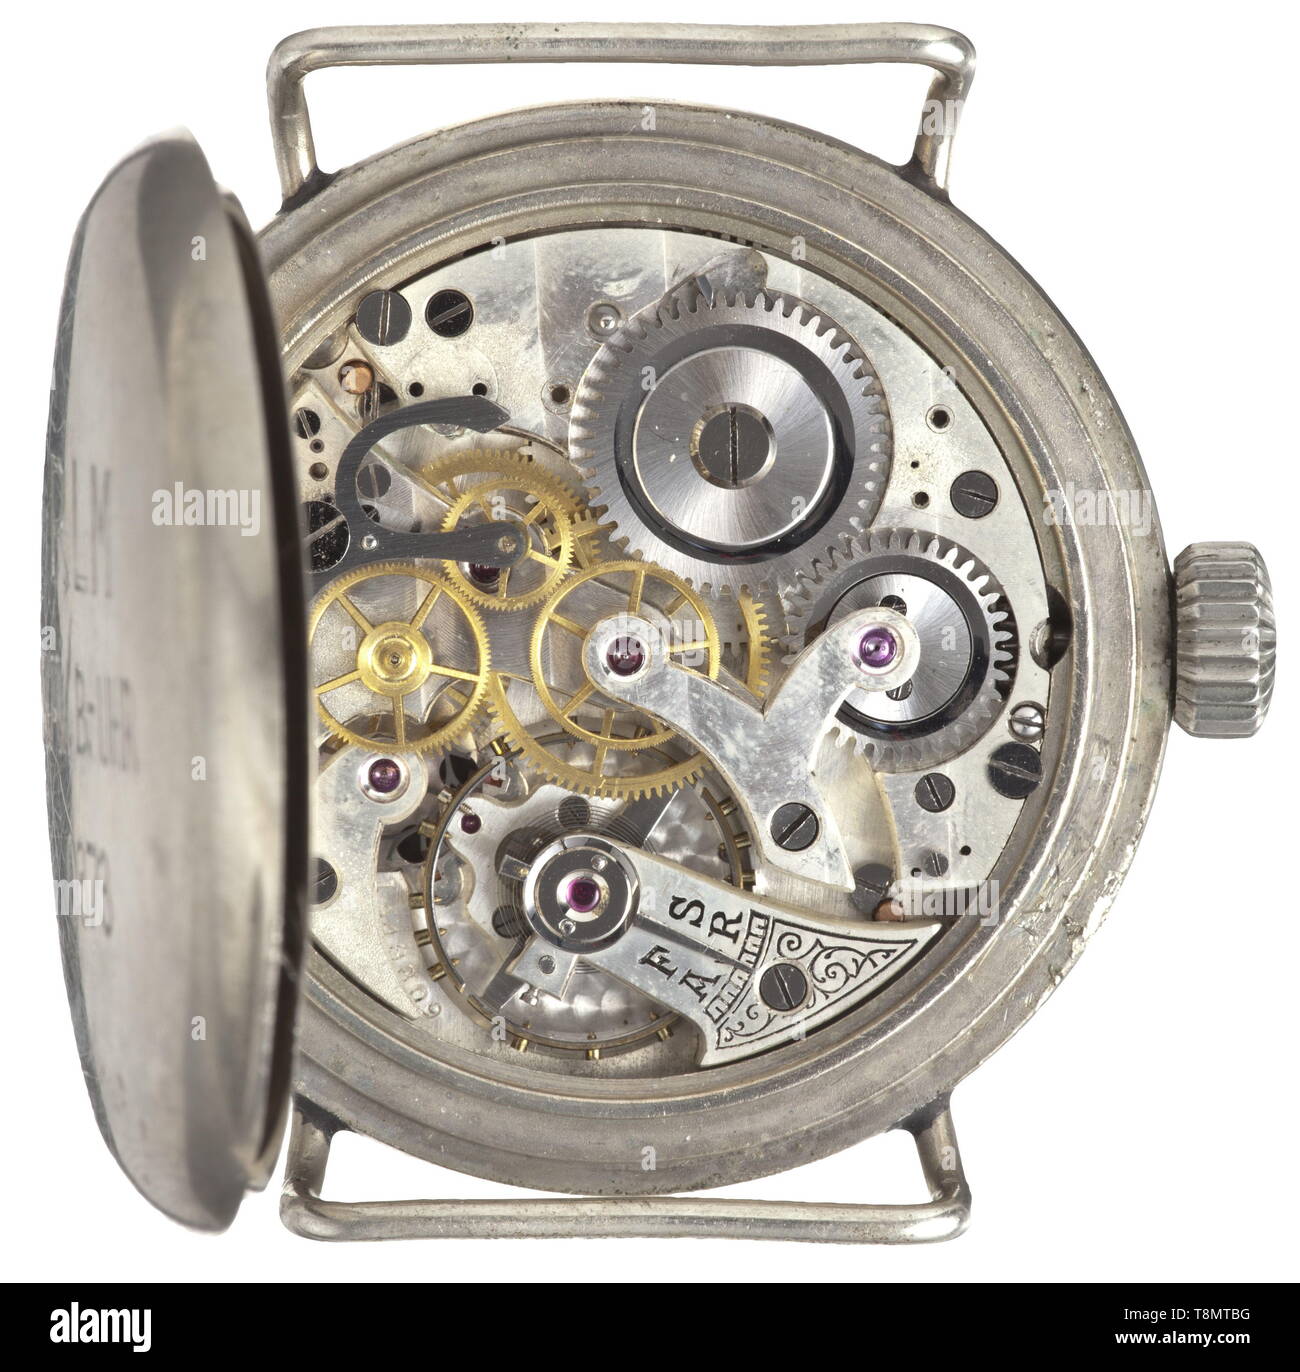 A B-watch for Reichs-Luftfahrtministerium (air ministry) Presumably  assembled by Wempe. Black face, hands with luminous substance. Outside  cover with exterior imprint "RLM NAV. B.-UHR 0373". Mechanism probably by  Minerva. Watch starts running